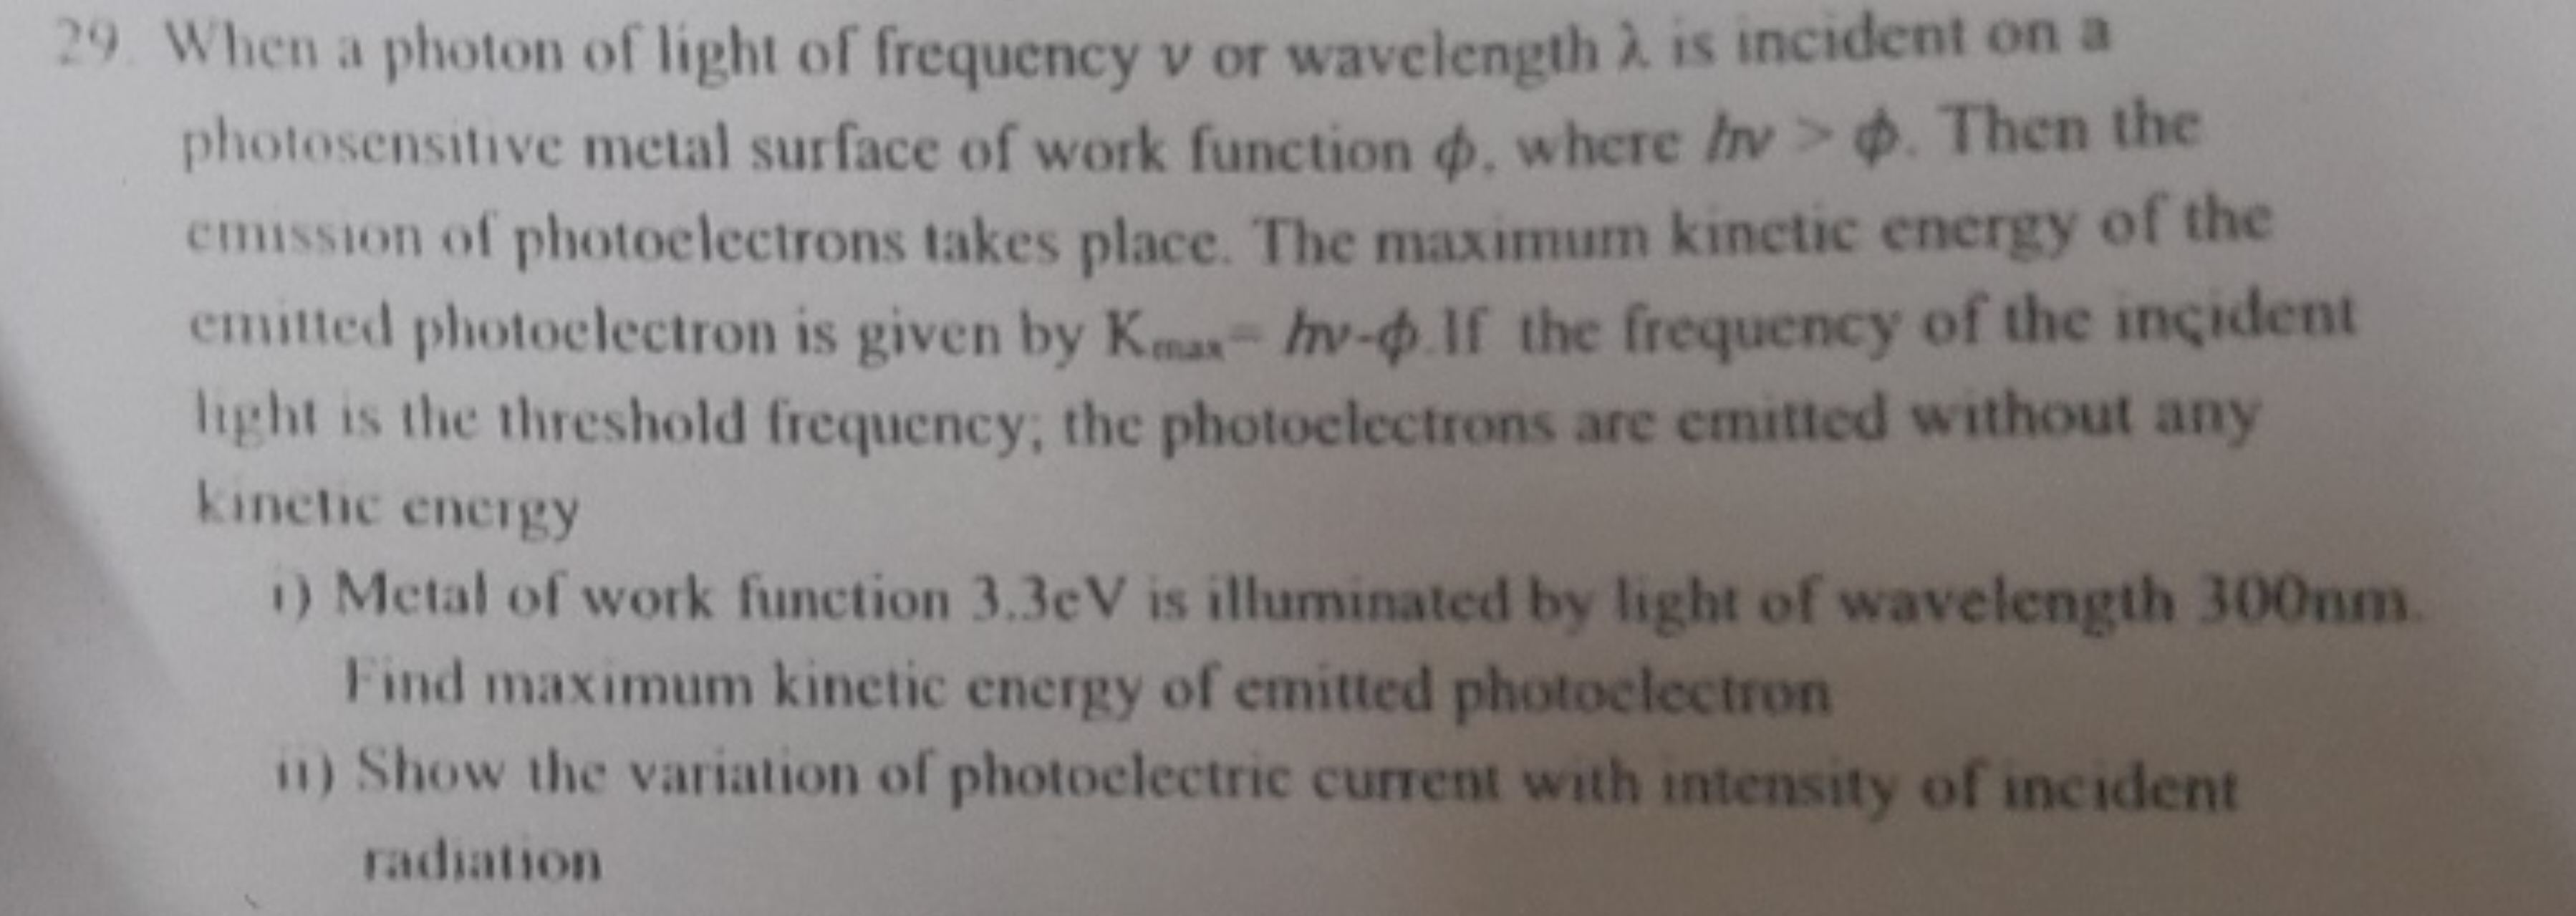 29. When a photon of light of frequency v or wavelength λ is incident 